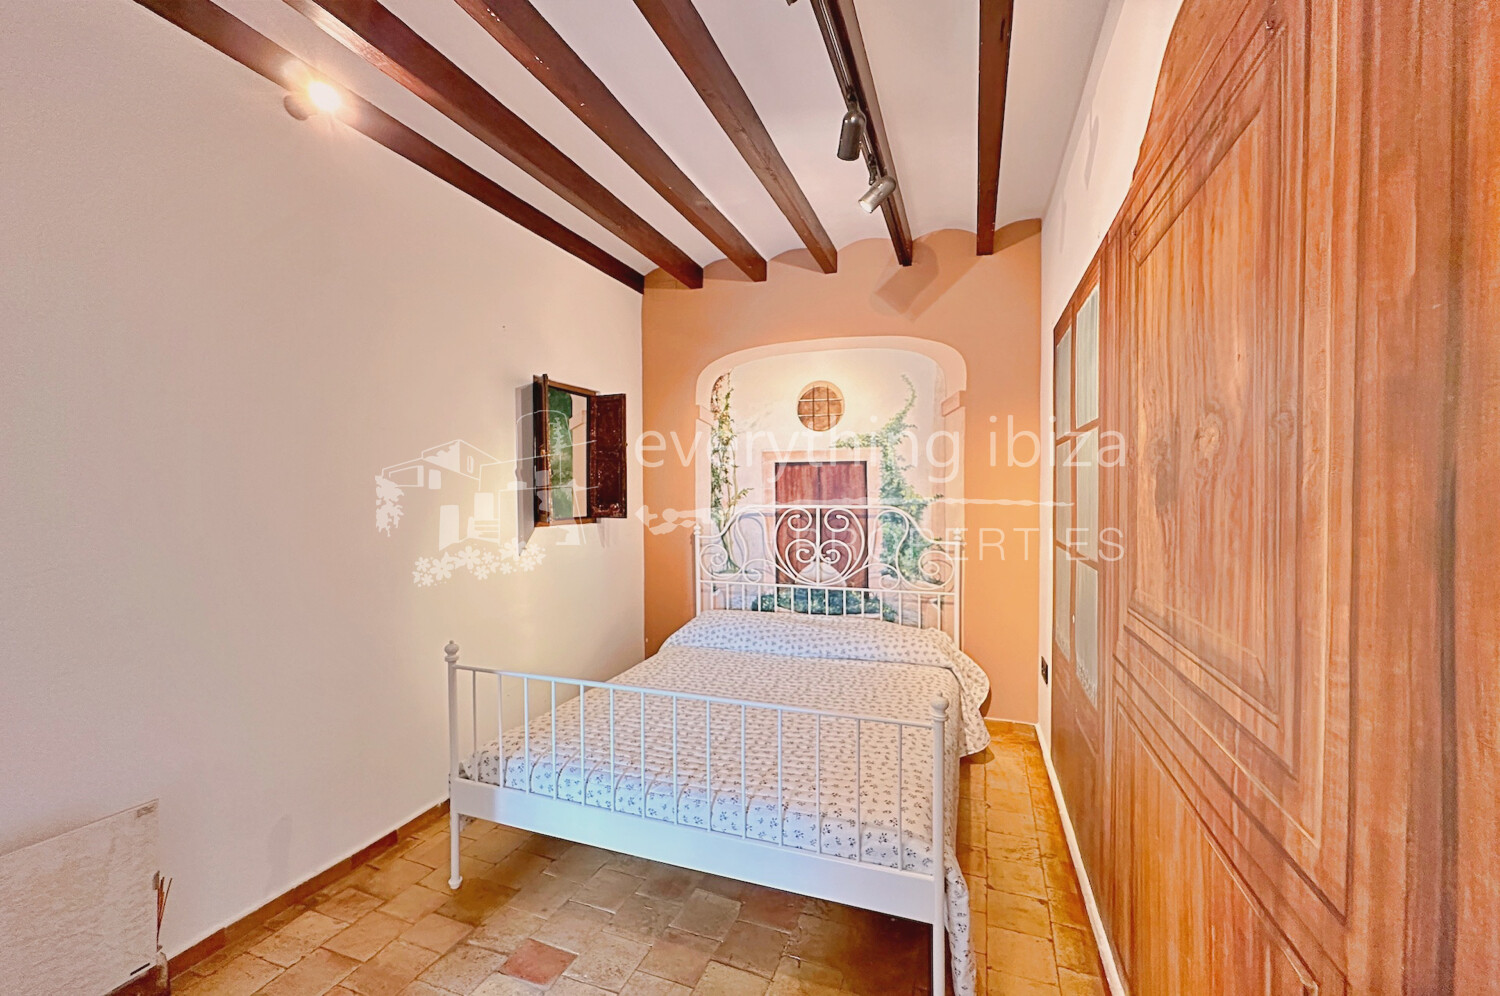 Lovely Modernised Four Bedroom Townhouse Ibiza Old Town, ref. 1645, for sale in Ibiza by everything ibiza Properties